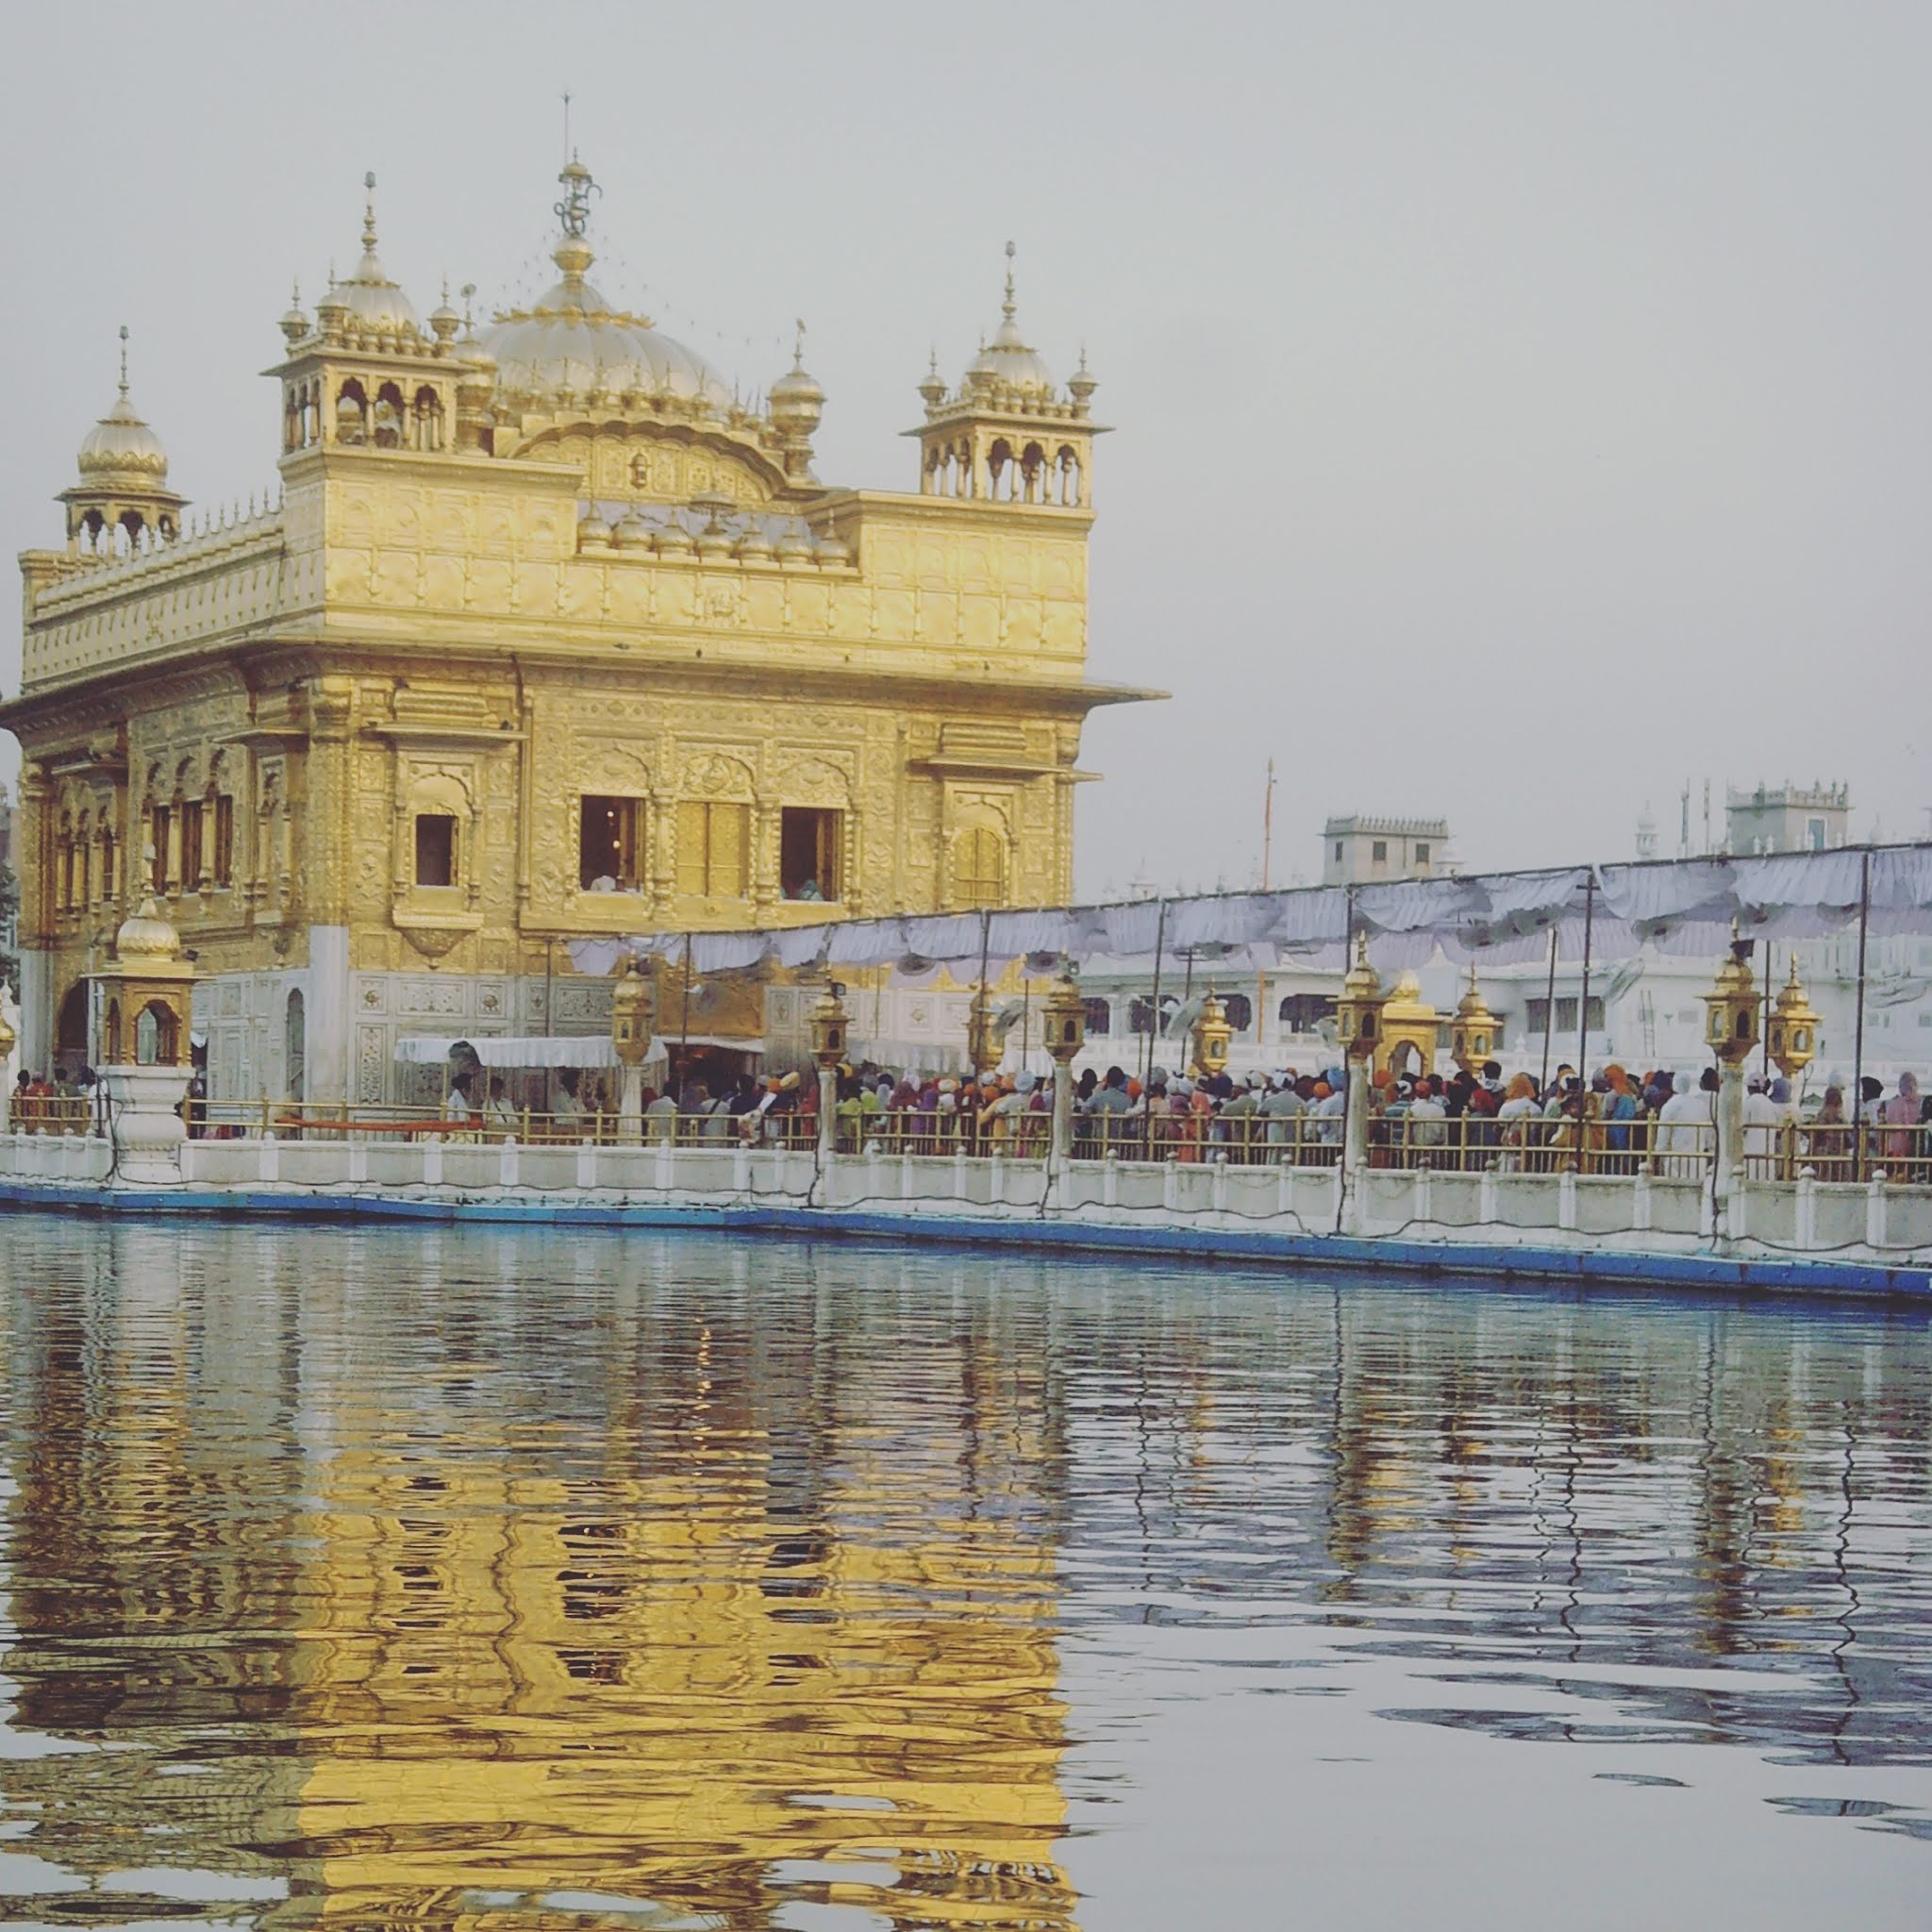 The golden temple on lake amritsar in india with reflection, one of the most beautiful temples in india